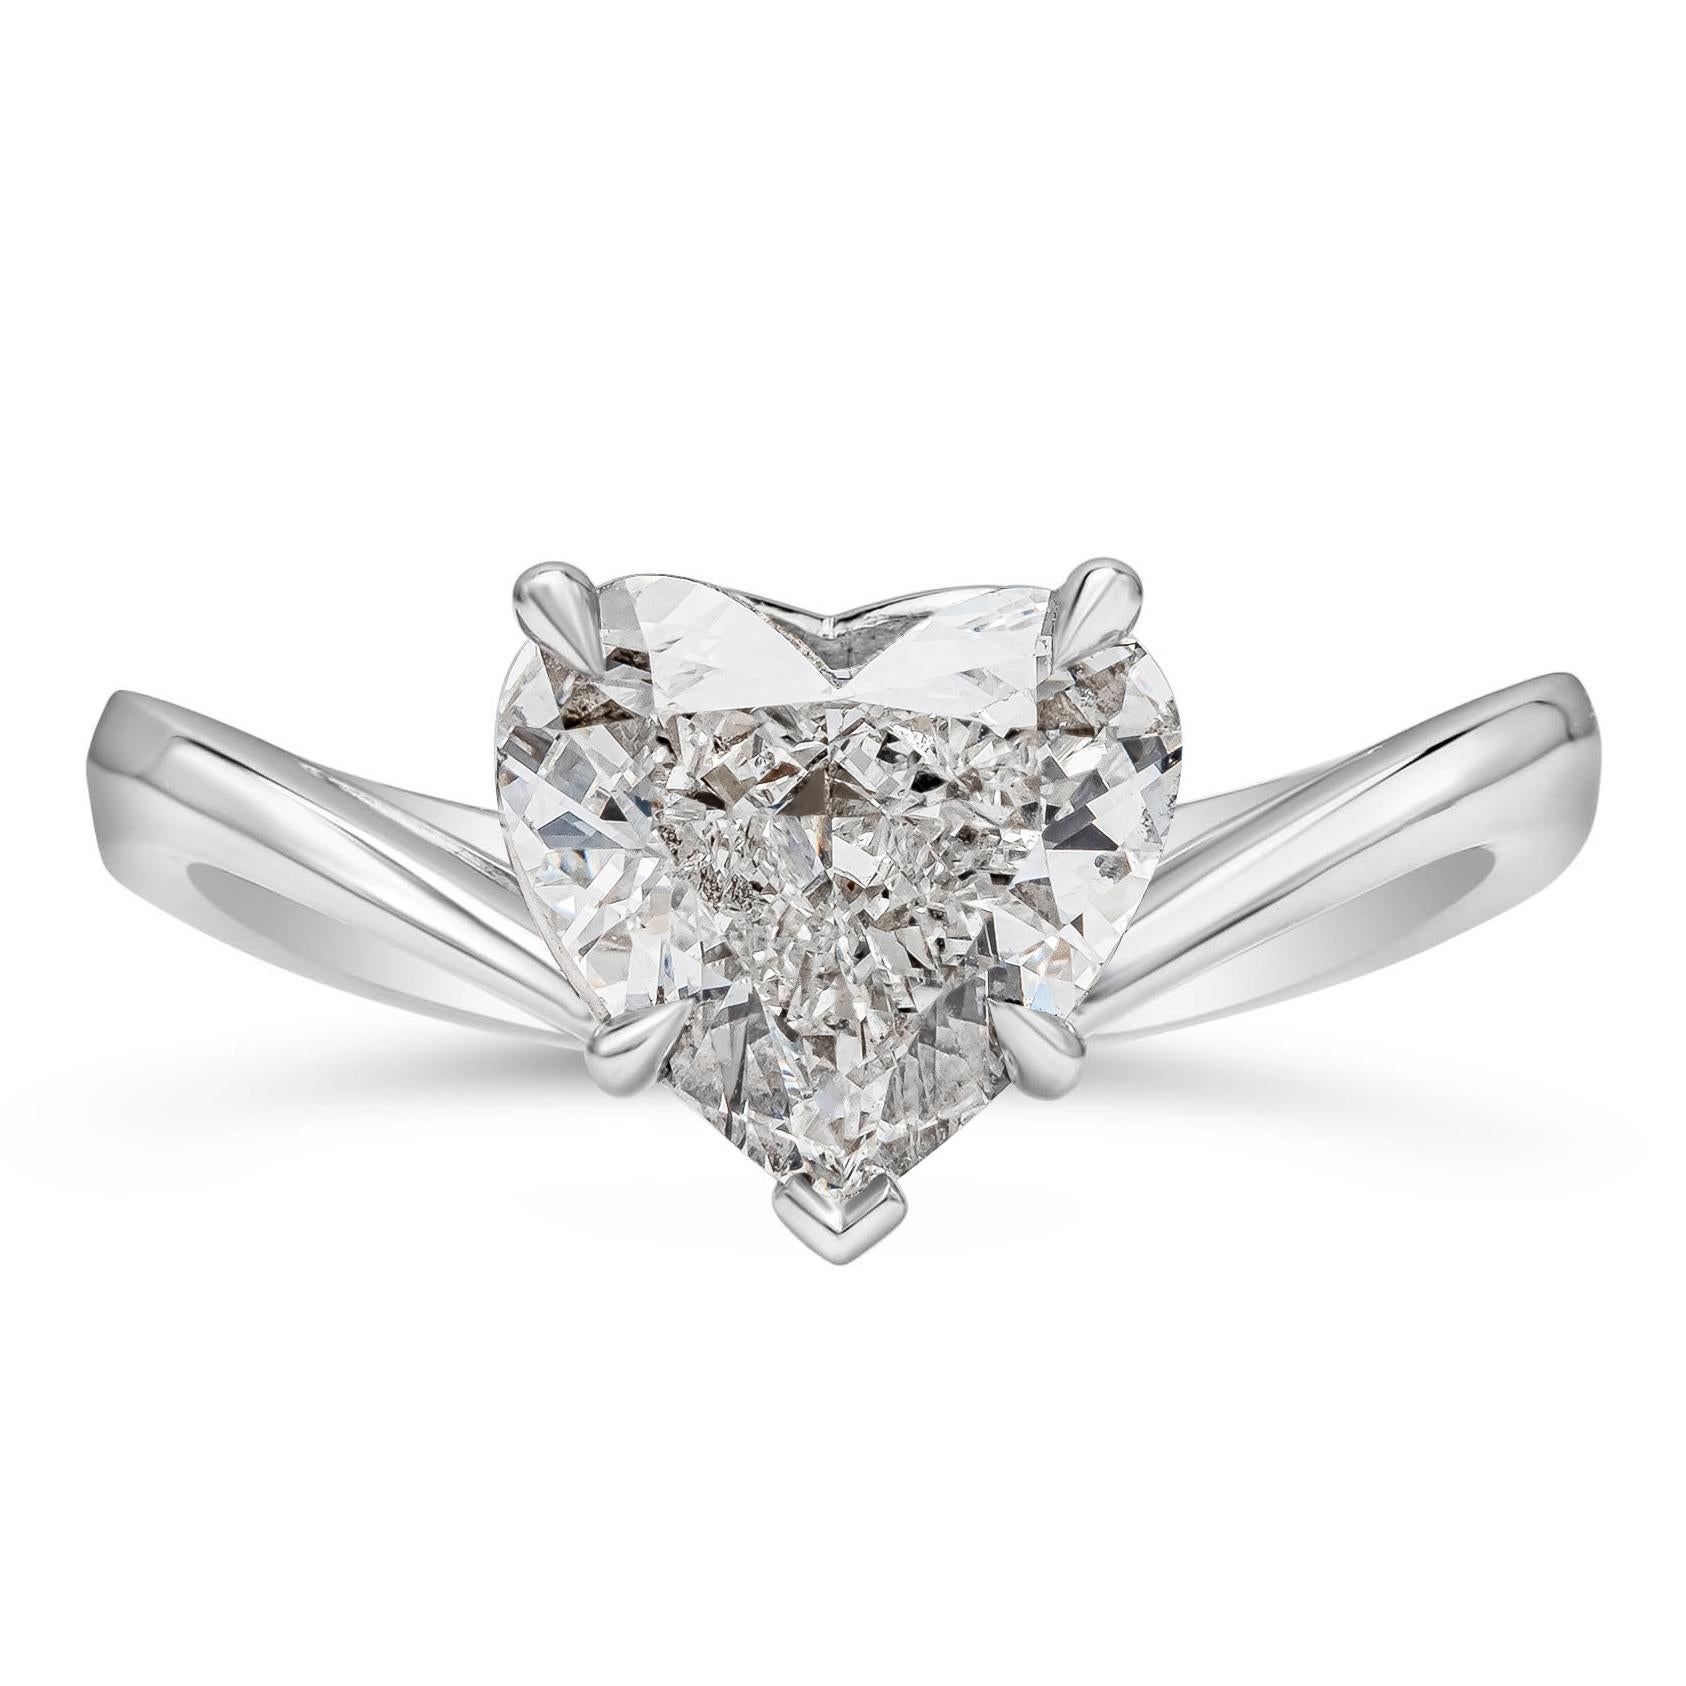 A well crafted engagement ring showcasing a 2.00 carats total heart shape diamond set in a chic contoured band and made in platinum. GIA Certified heart shape diamond is classified as F color and SI2 in clarity.

Style available in different price